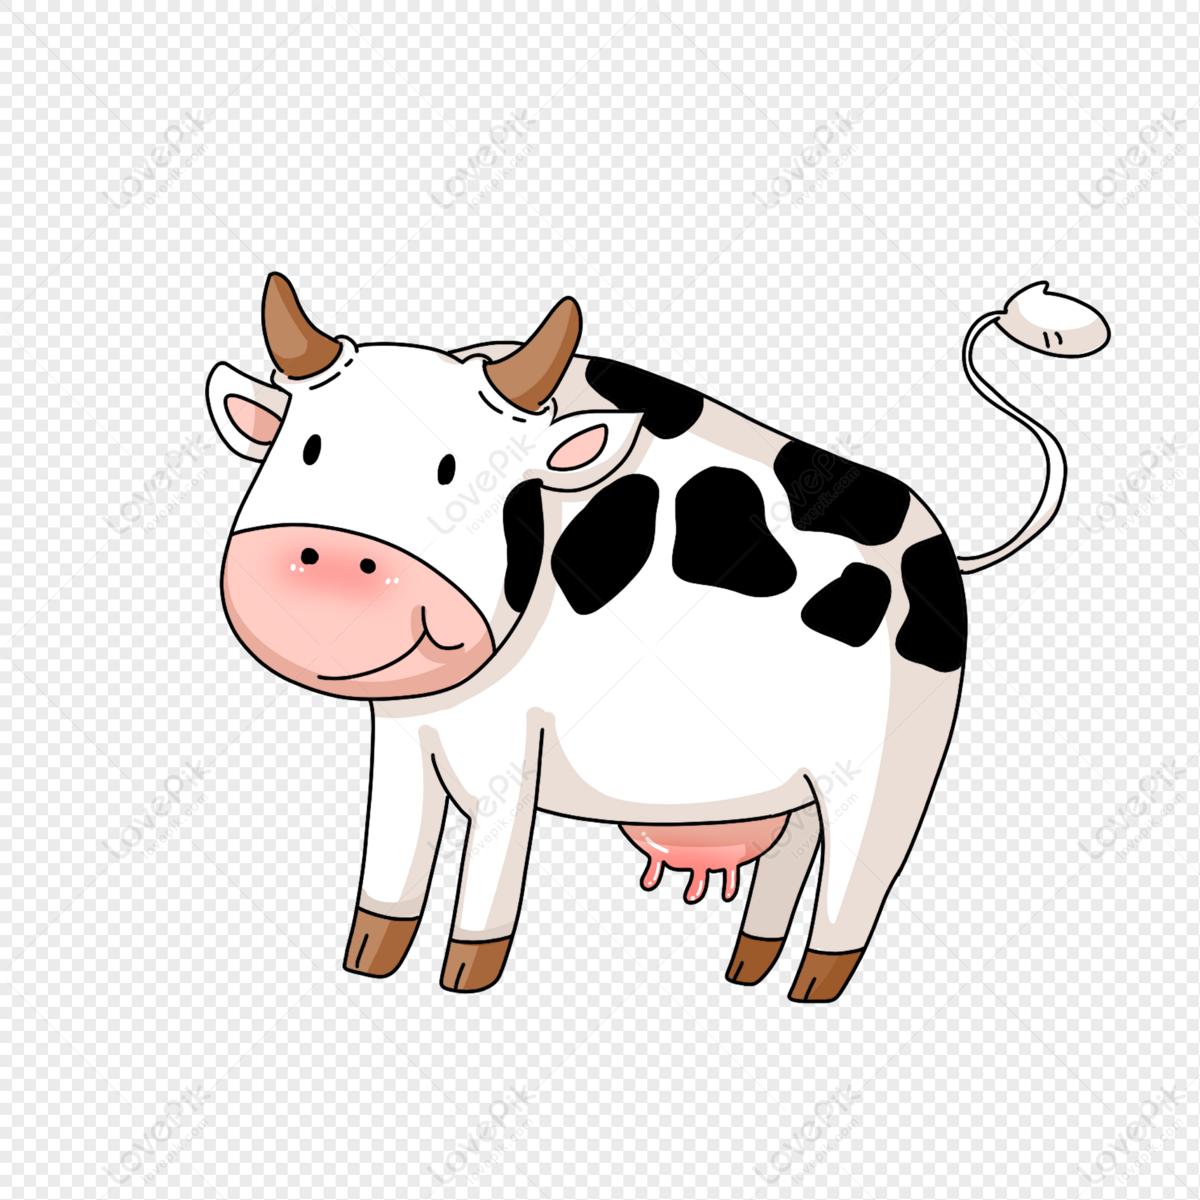 Cartoon Cow PNG Transparent And Clipart Image For Free Download - Lovepik |  401734726